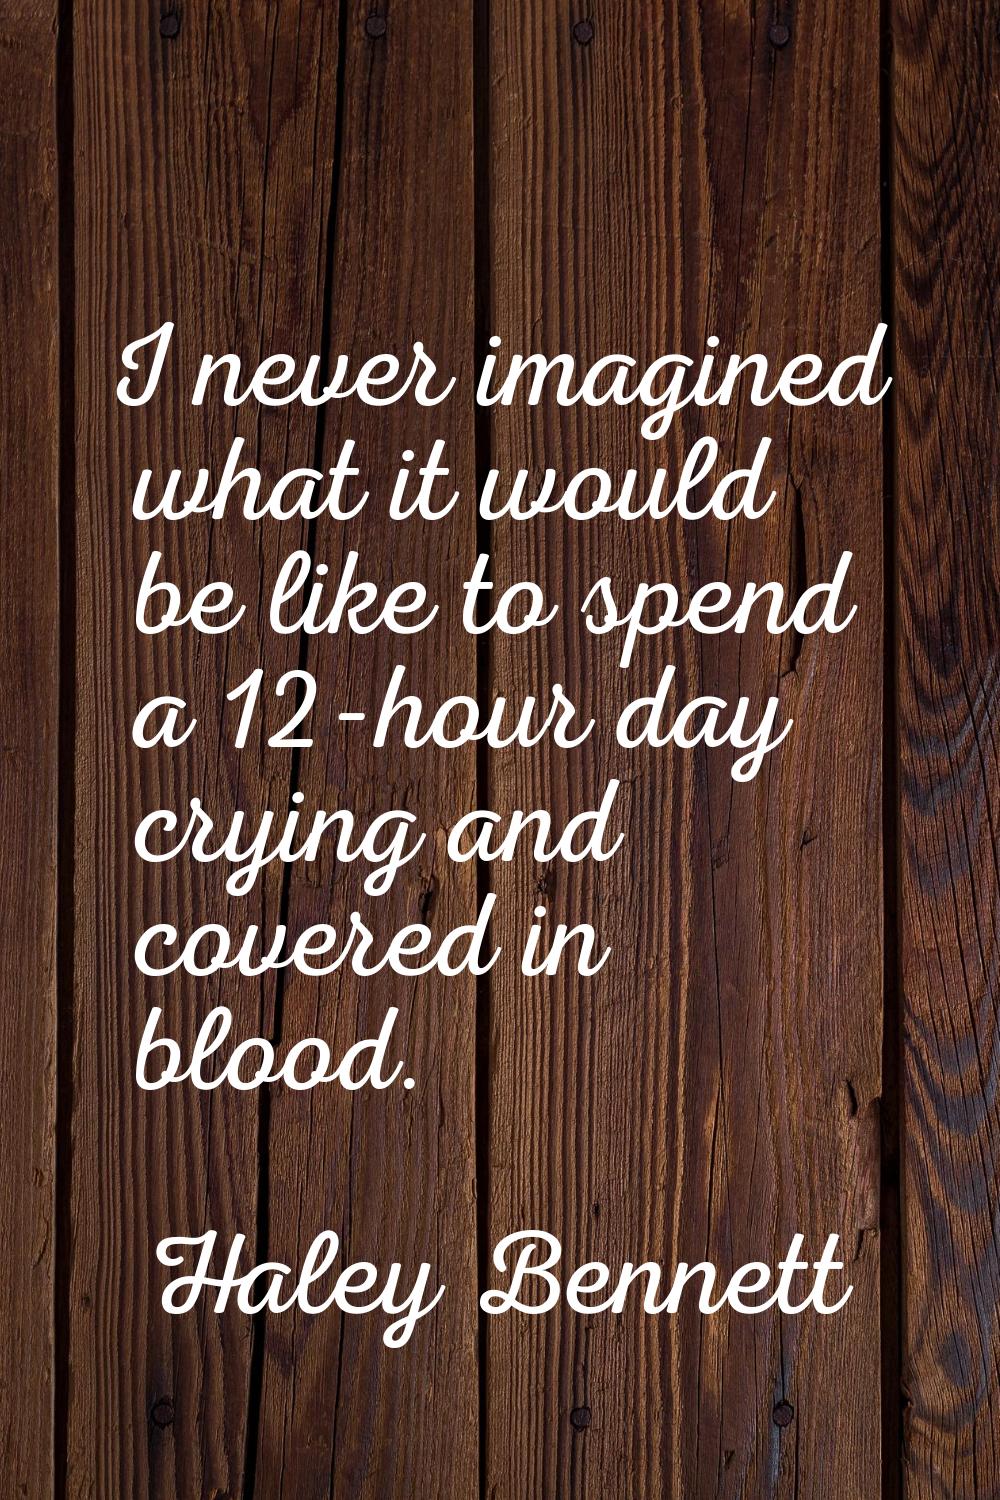 I never imagined what it would be like to spend a 12-hour day crying and covered in blood.